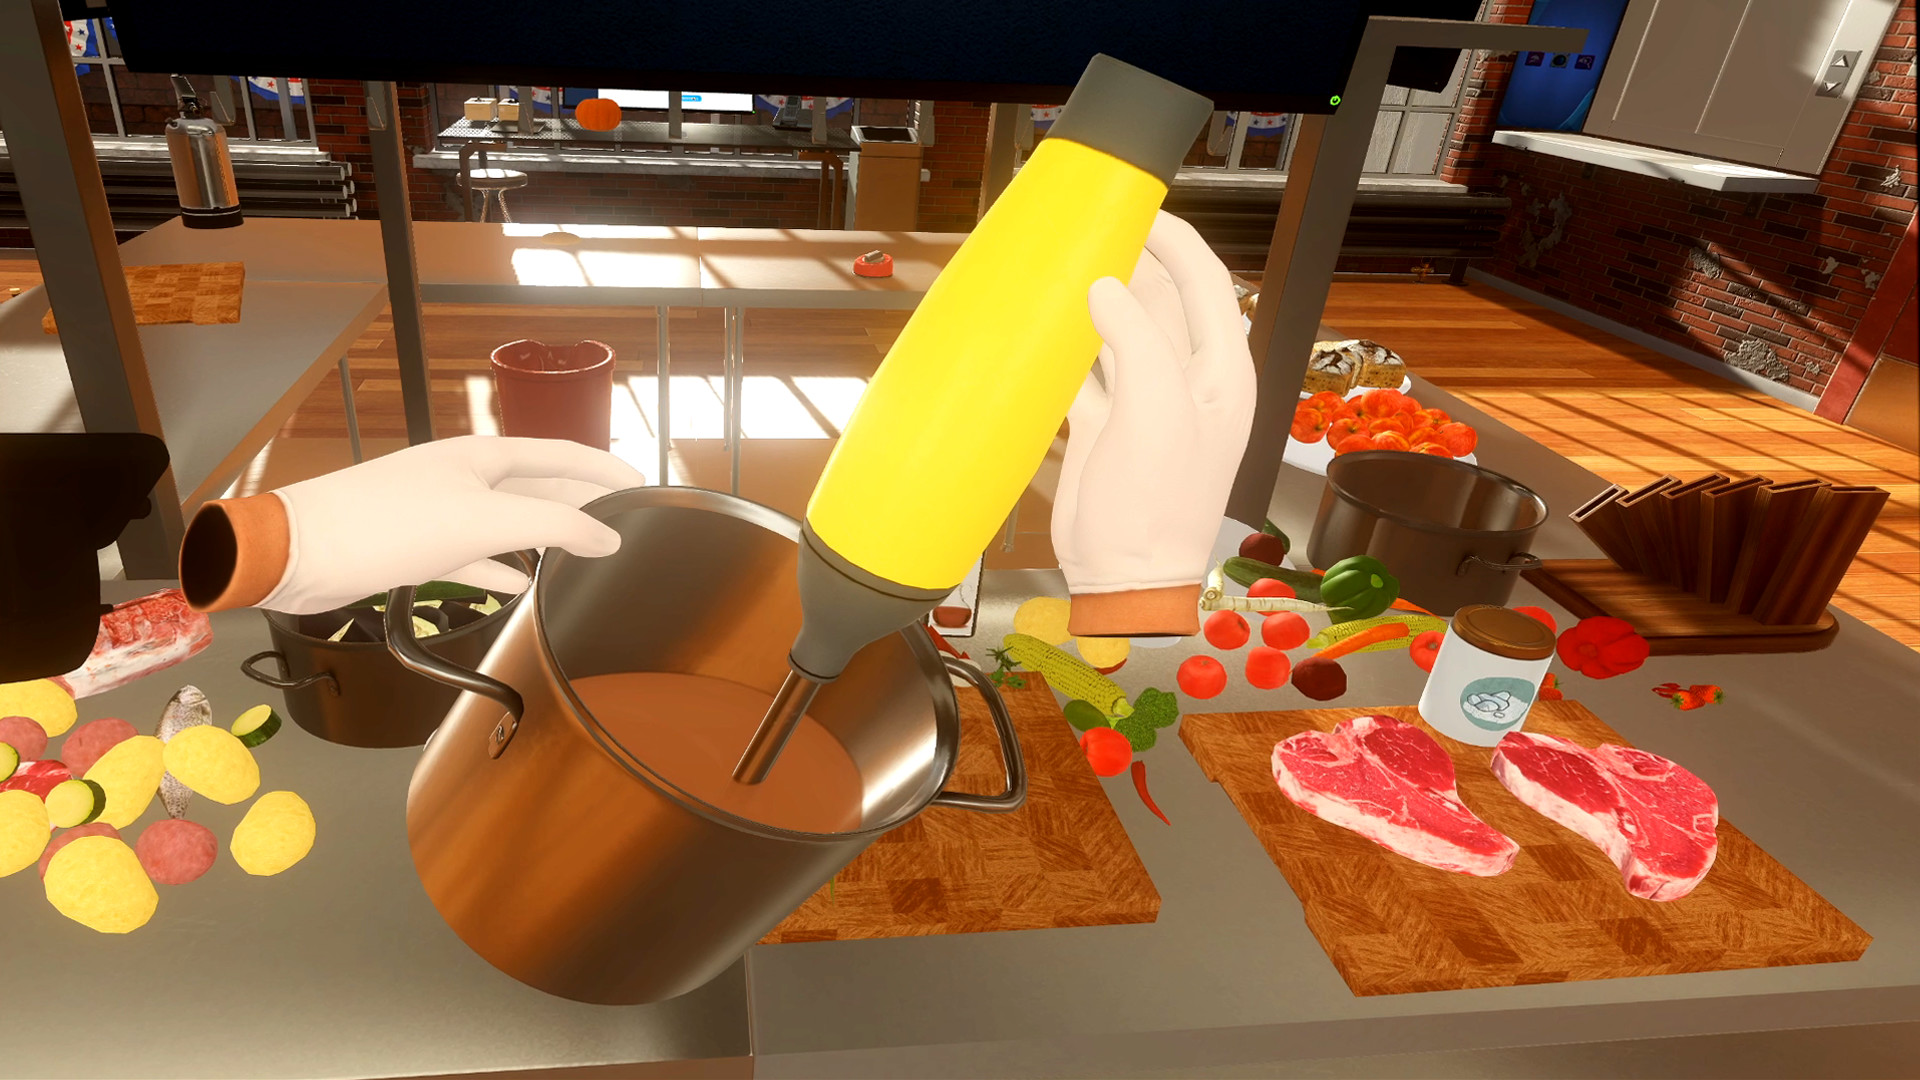 Cooking Simulator 2: A multiplayer cooking experience announced by